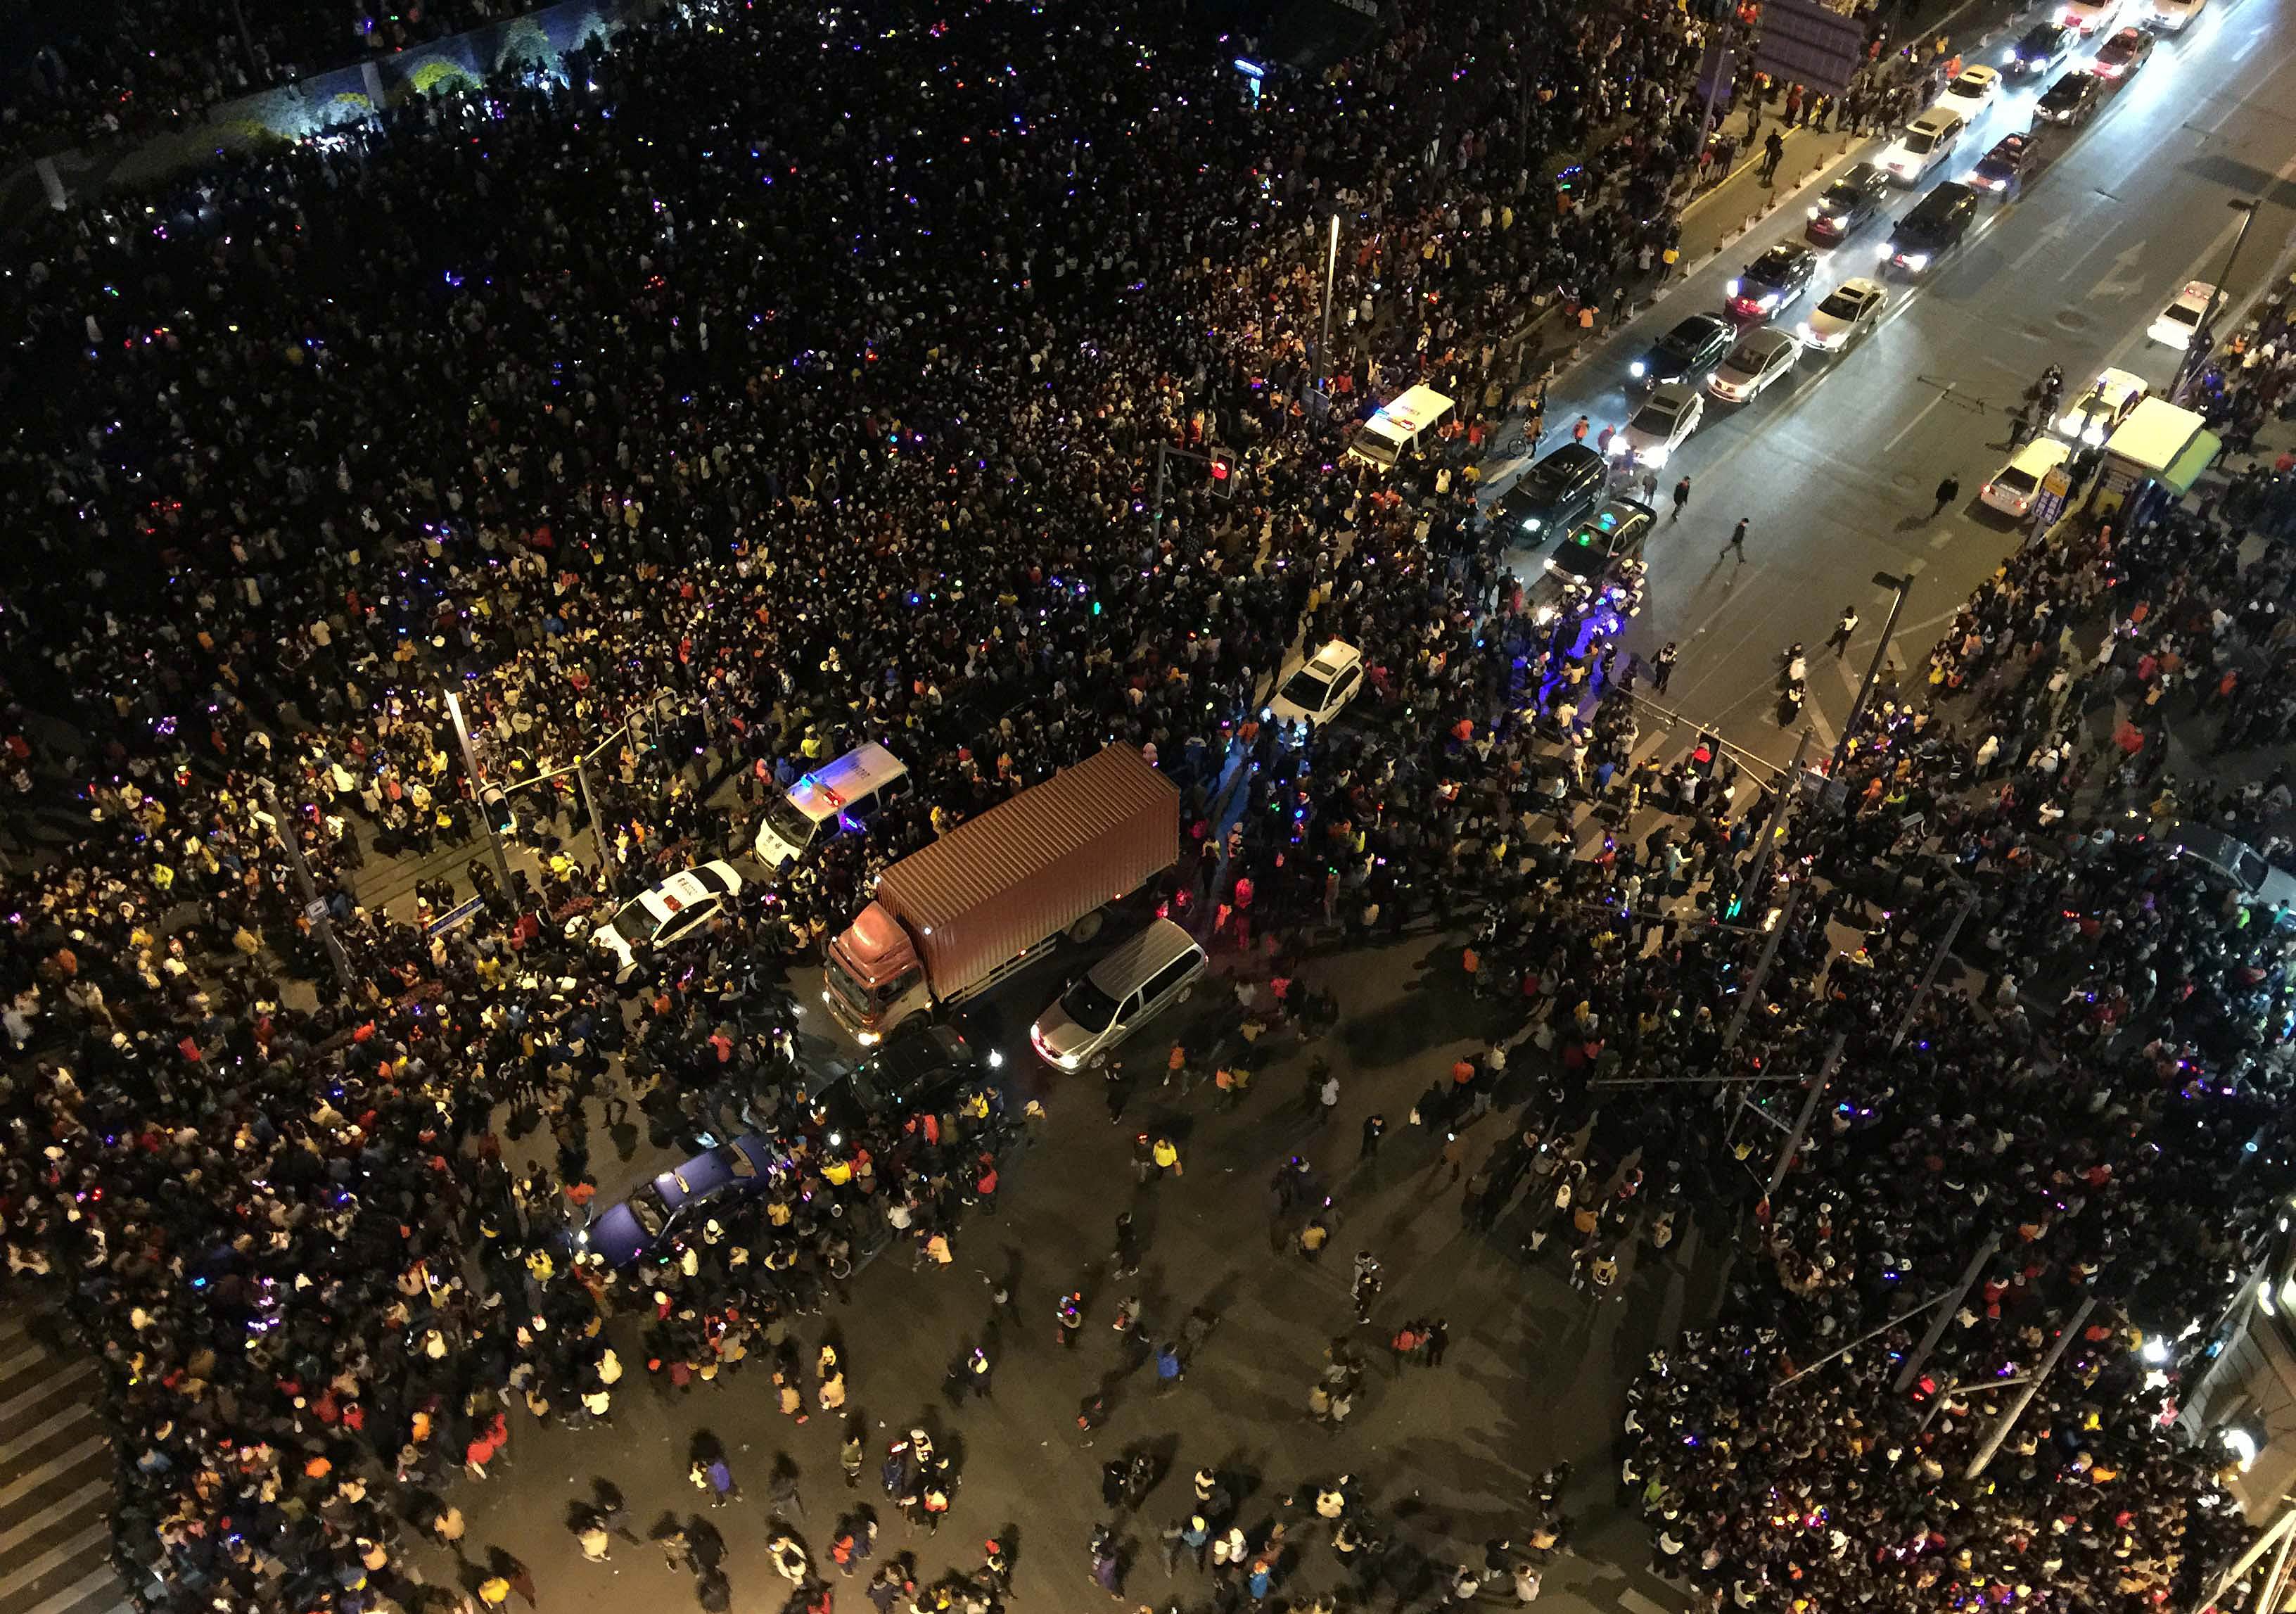 This overhead view shows emergency vehicles amongst the crowd after a stampede by new year's revellers in Shanghai during the dawn of 2015. Photo: AFP 